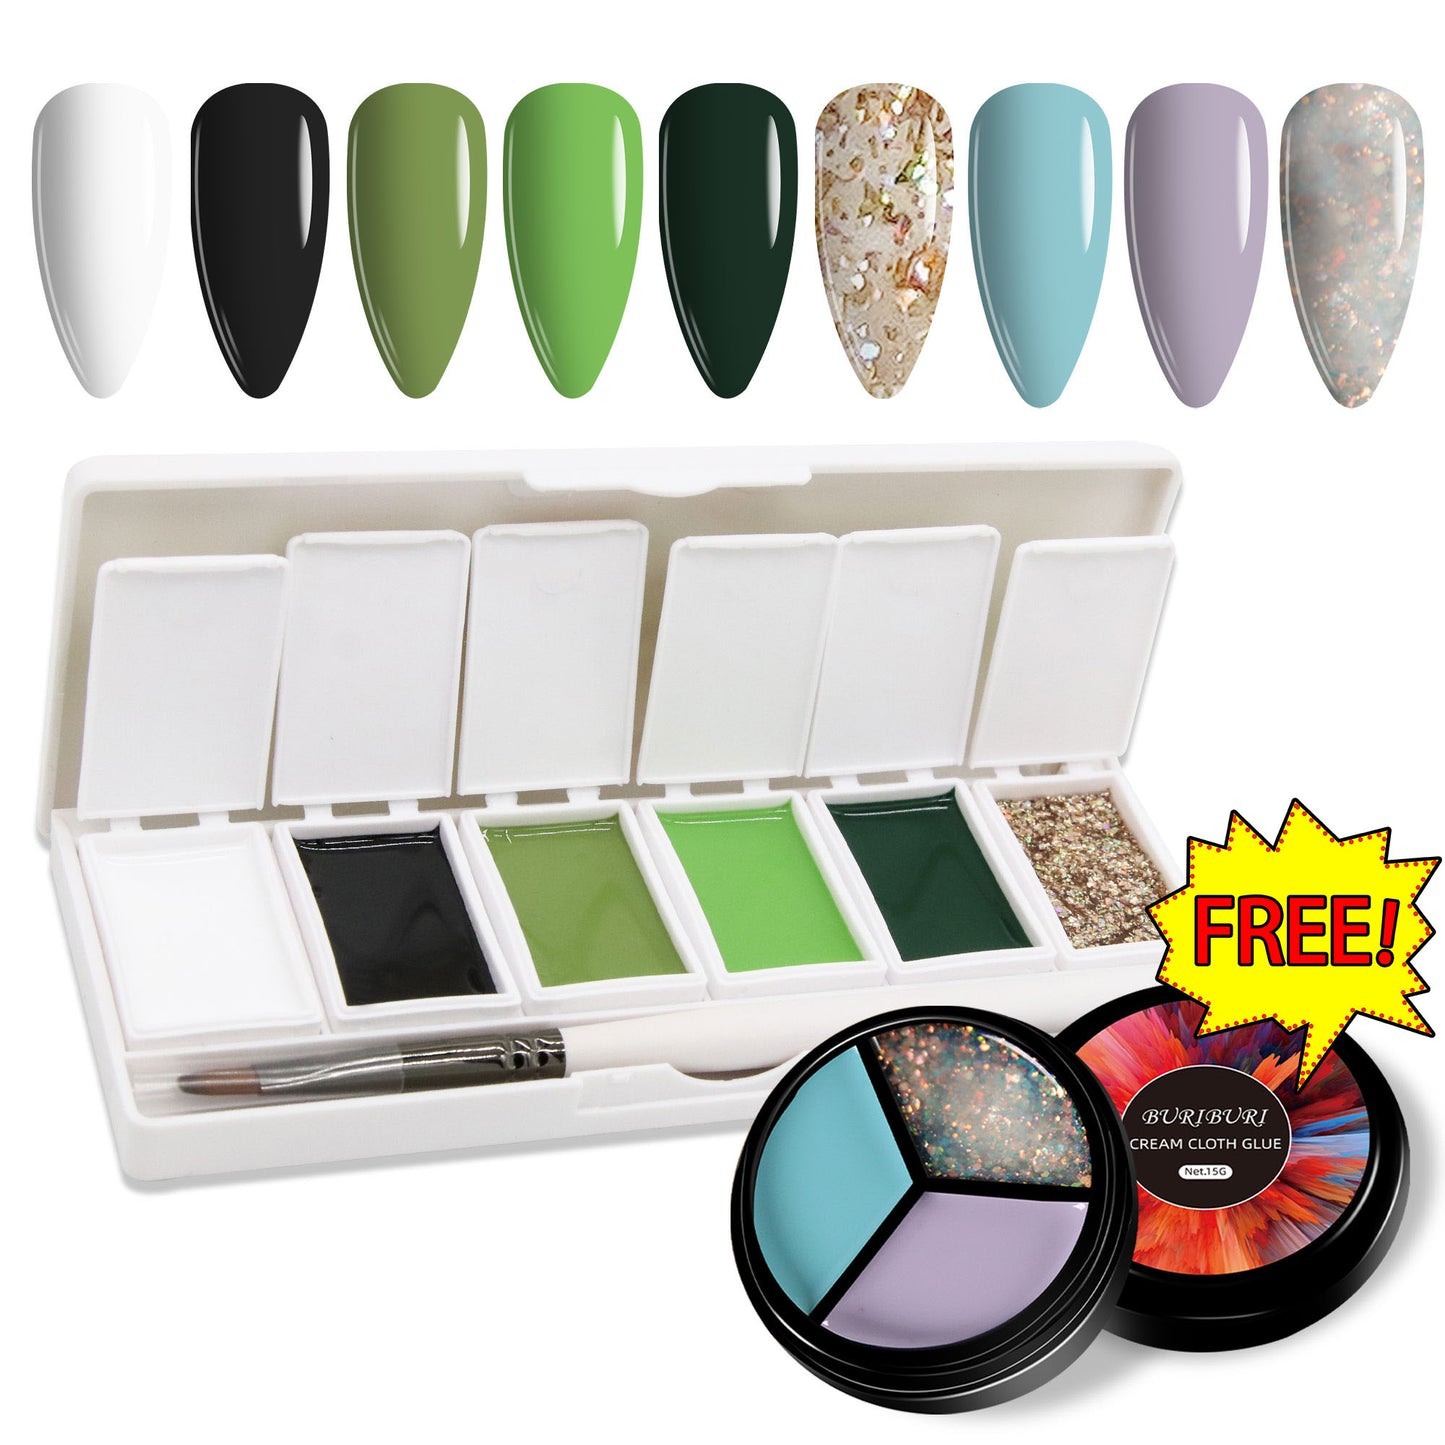 Misty Forest 6-colors-in-1 + Free 3-colors-in-1 (#20) Solid Cream Gel Polish